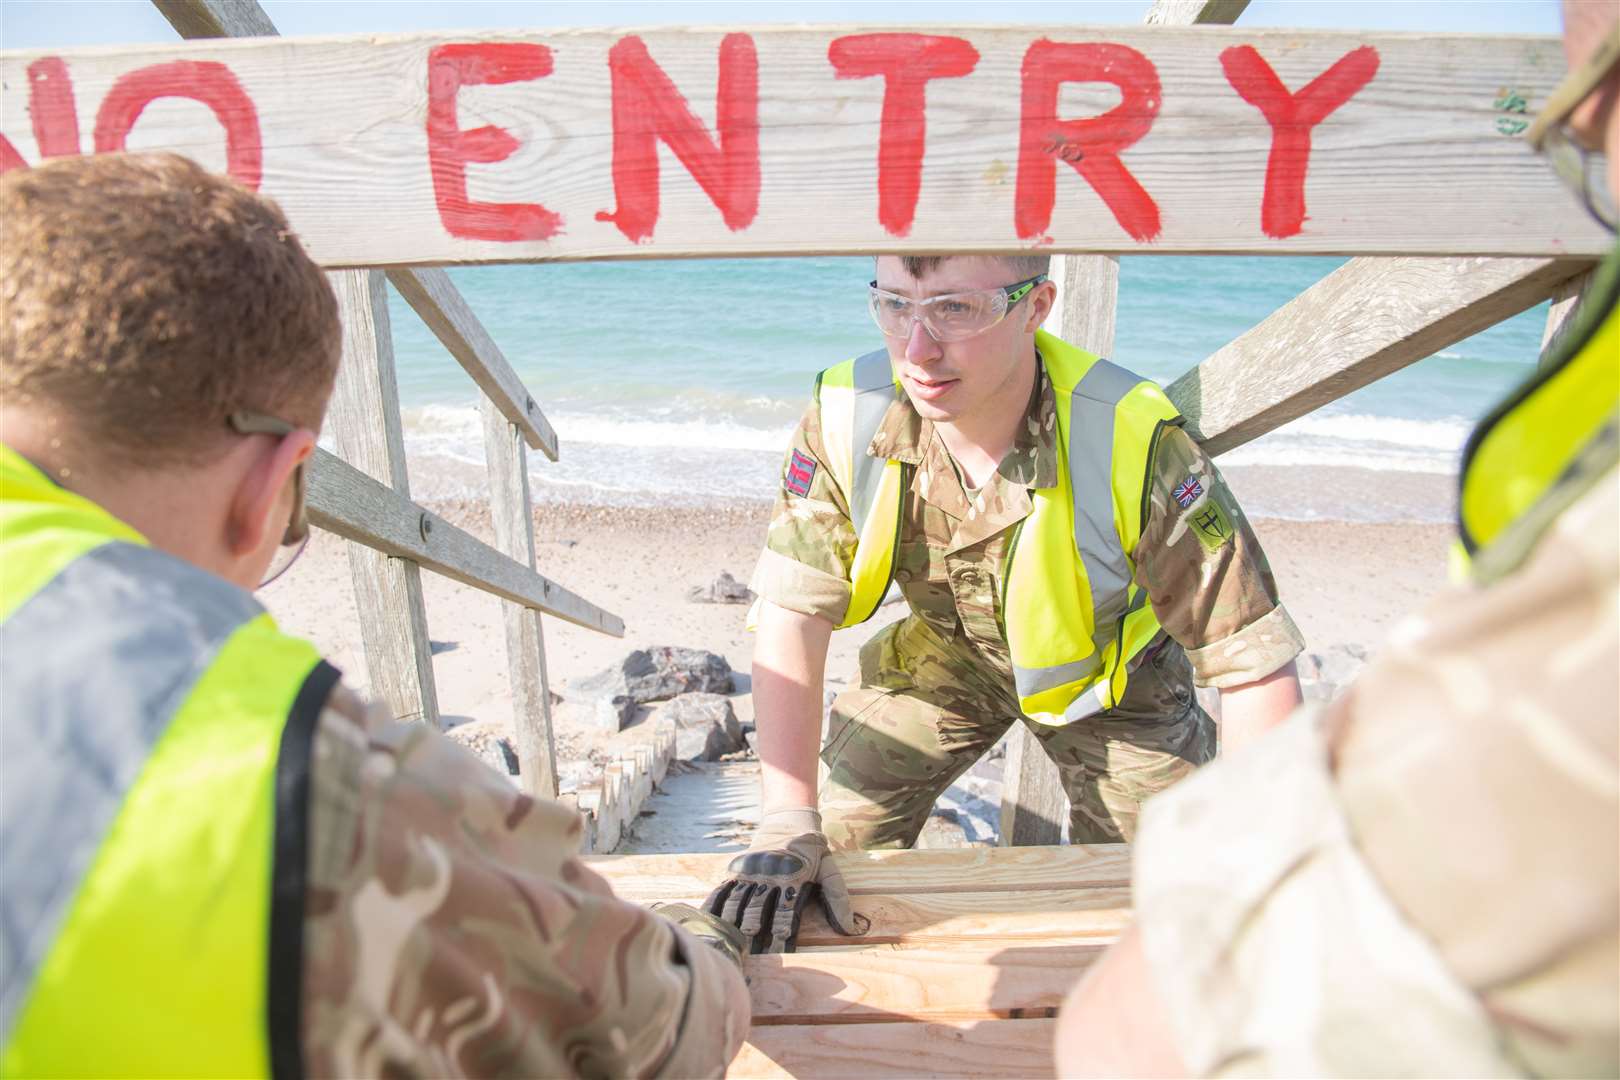 No entry, but not for much longer as the 39 Engineer Regiment service personnel get to work. Picture: Daniel Forsyth